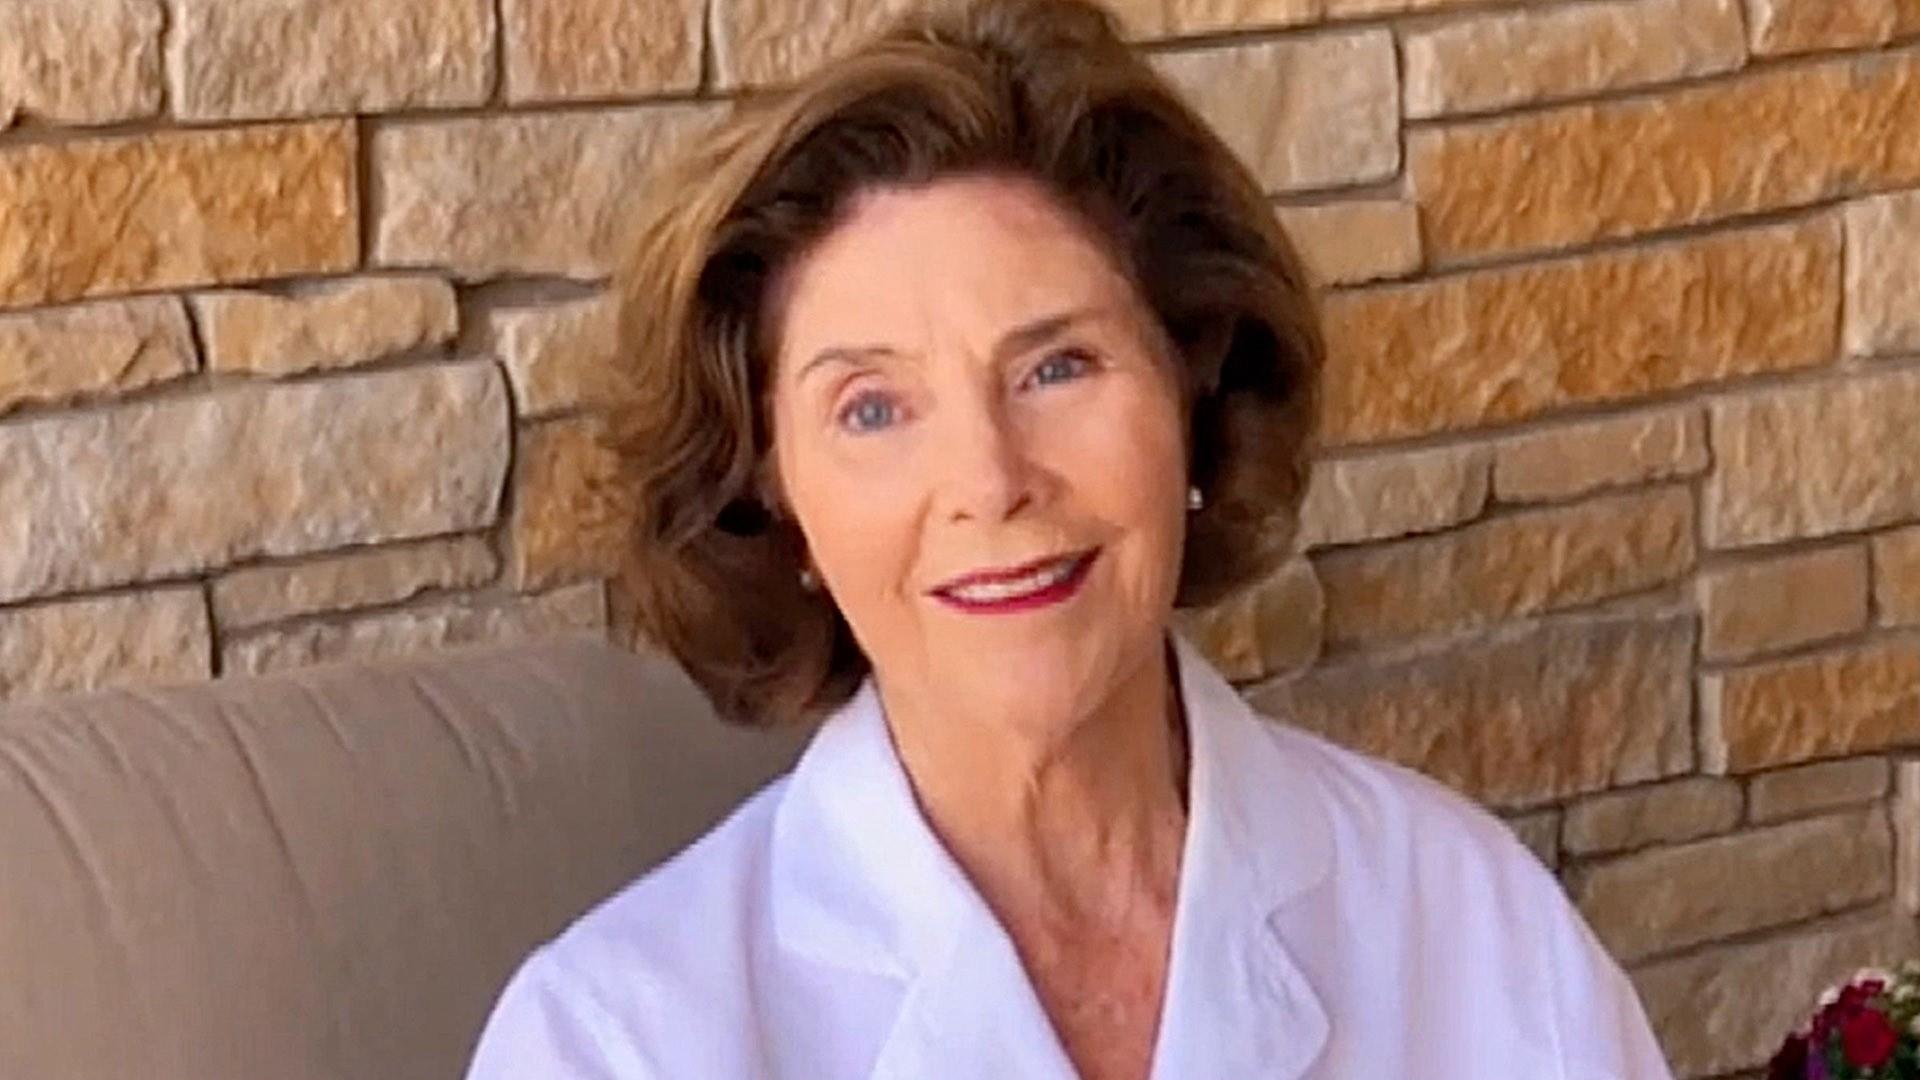 Laura Bush shares how she and George W. Bush are keeping busy in quarantine